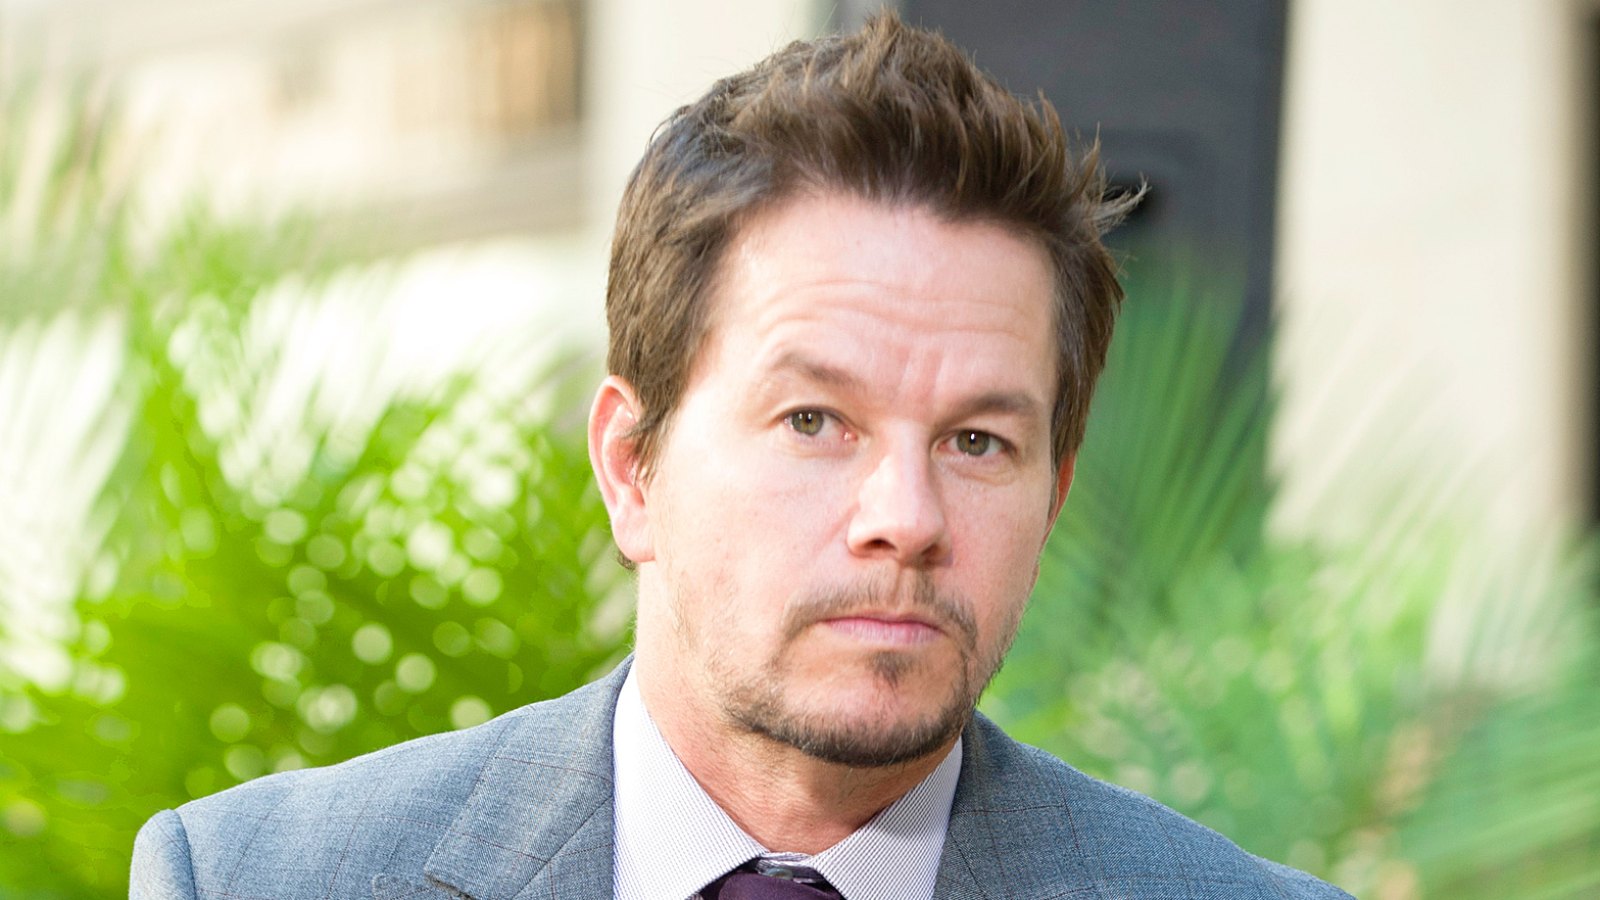 Mark Wahlberg appears on ‘Today‘ show